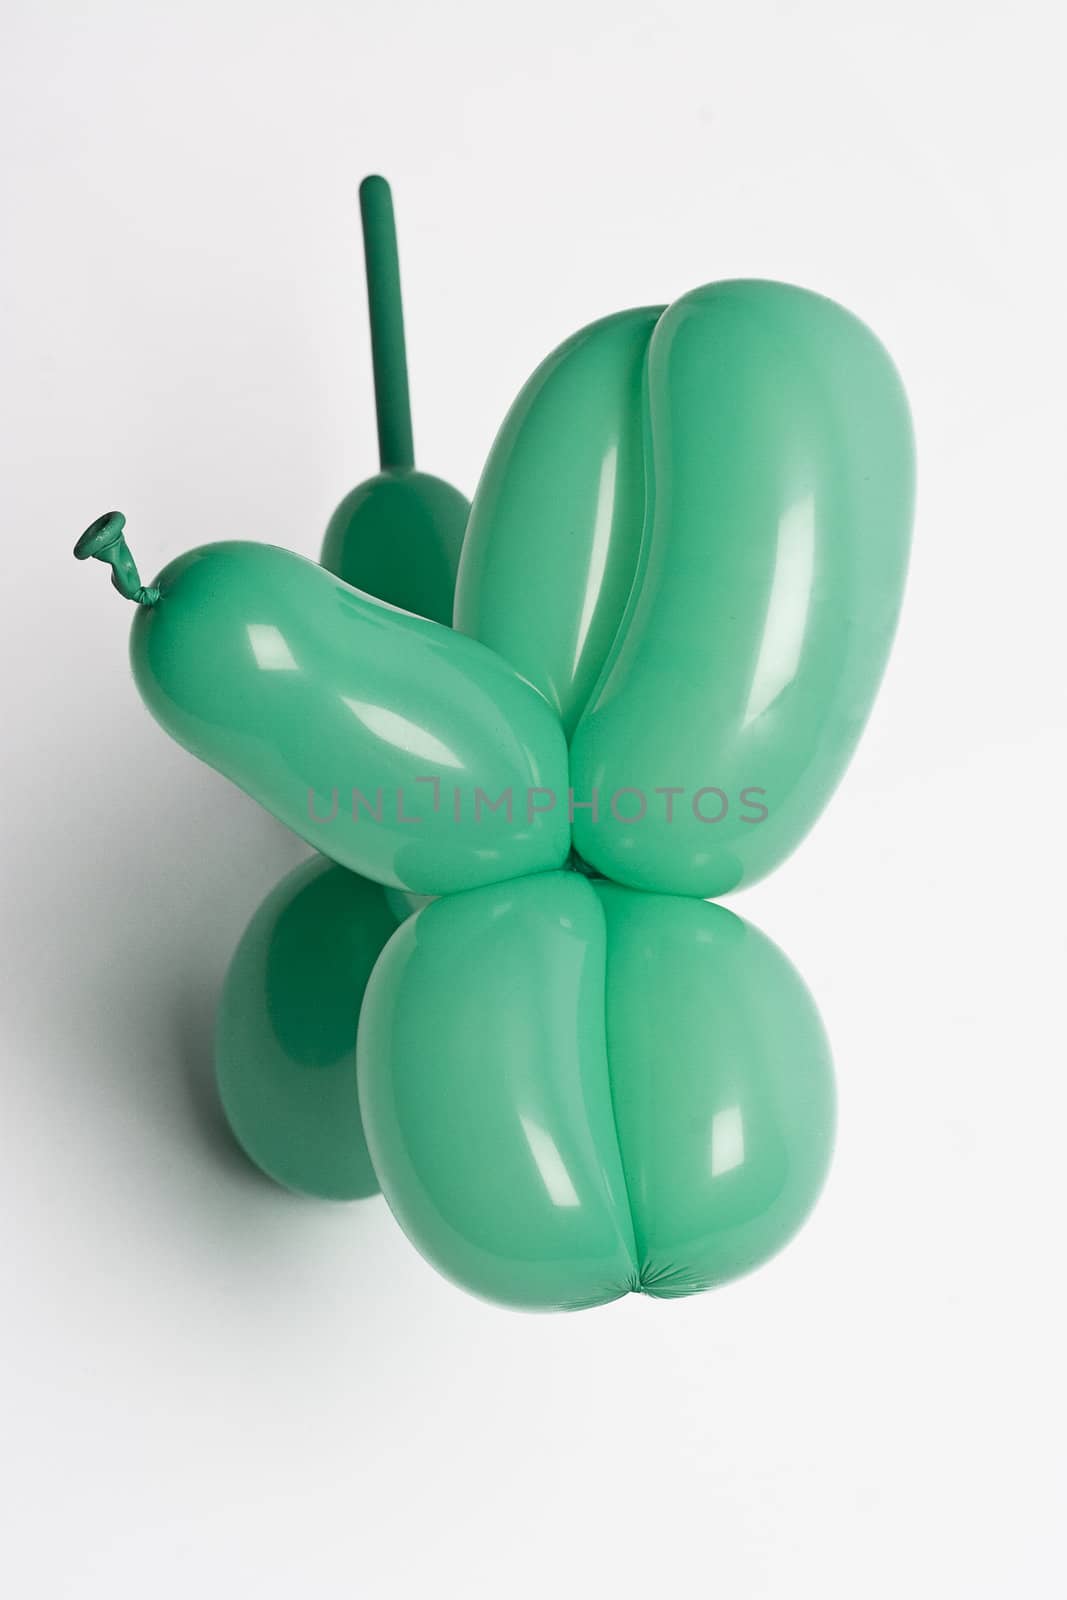 green balloon dog acting cute and begging